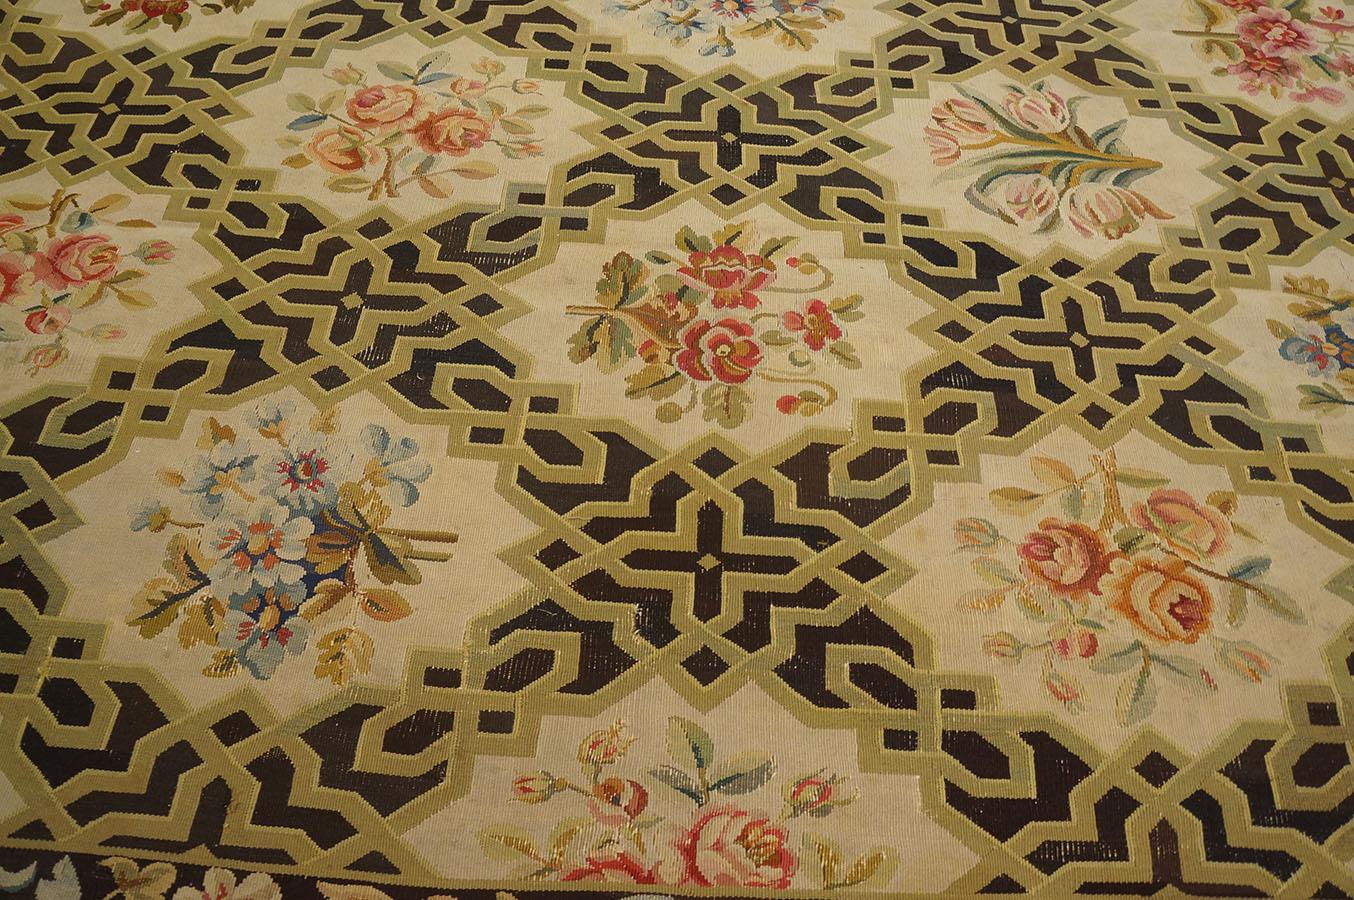 Early 20th Century French Aubusson Carpet ( 9' 8'' x 15' 3'' - 295 x 465 cm ) For Sale 2